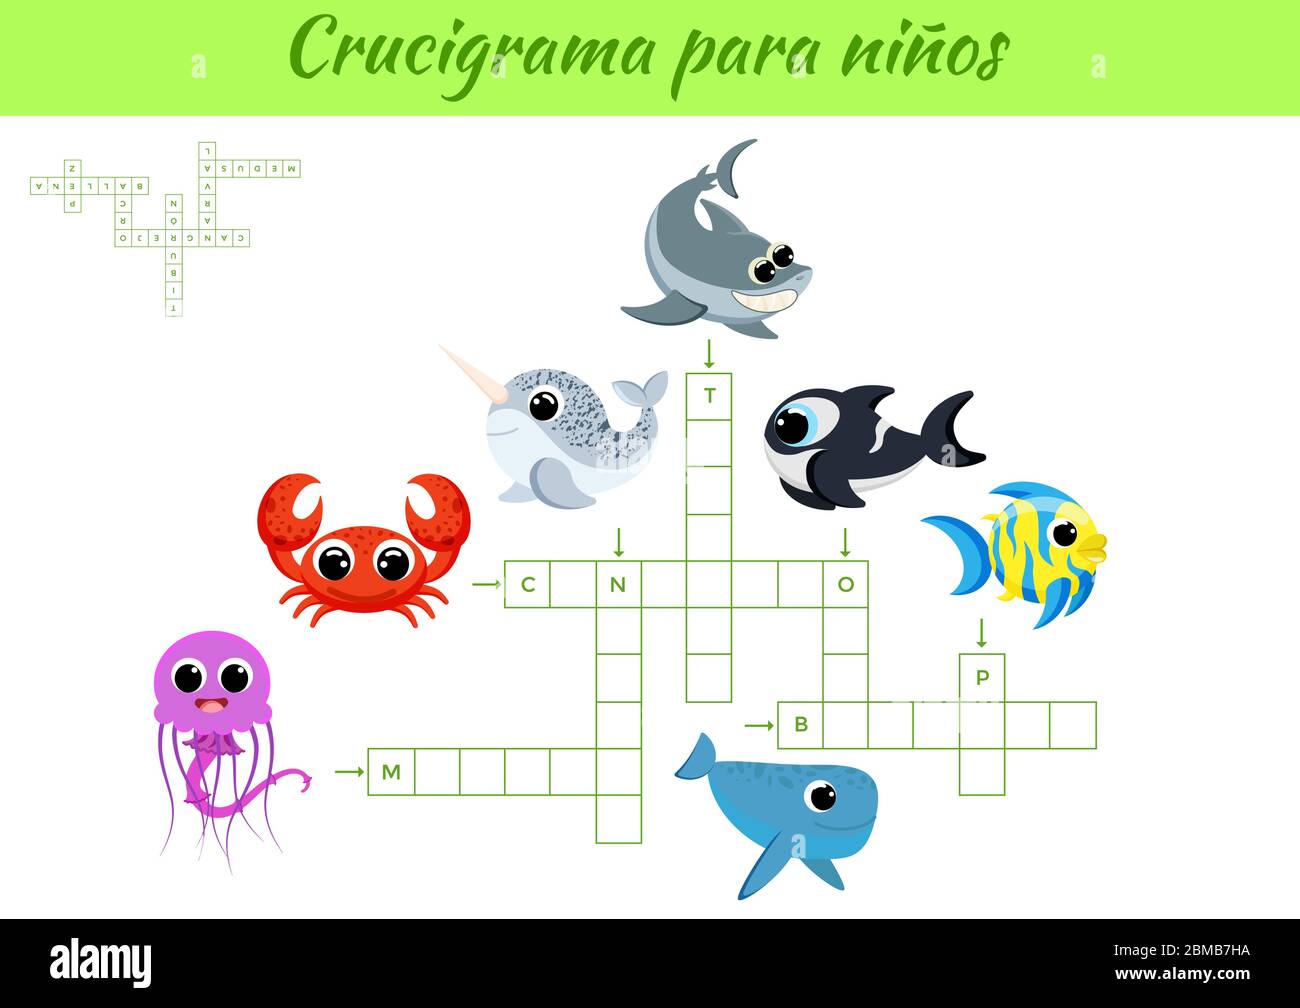 Crucigrama para niños - Crossword for kids with pictures. Activity worksheet colorful printable version. Educational game for study Spanish words. Stock Vector